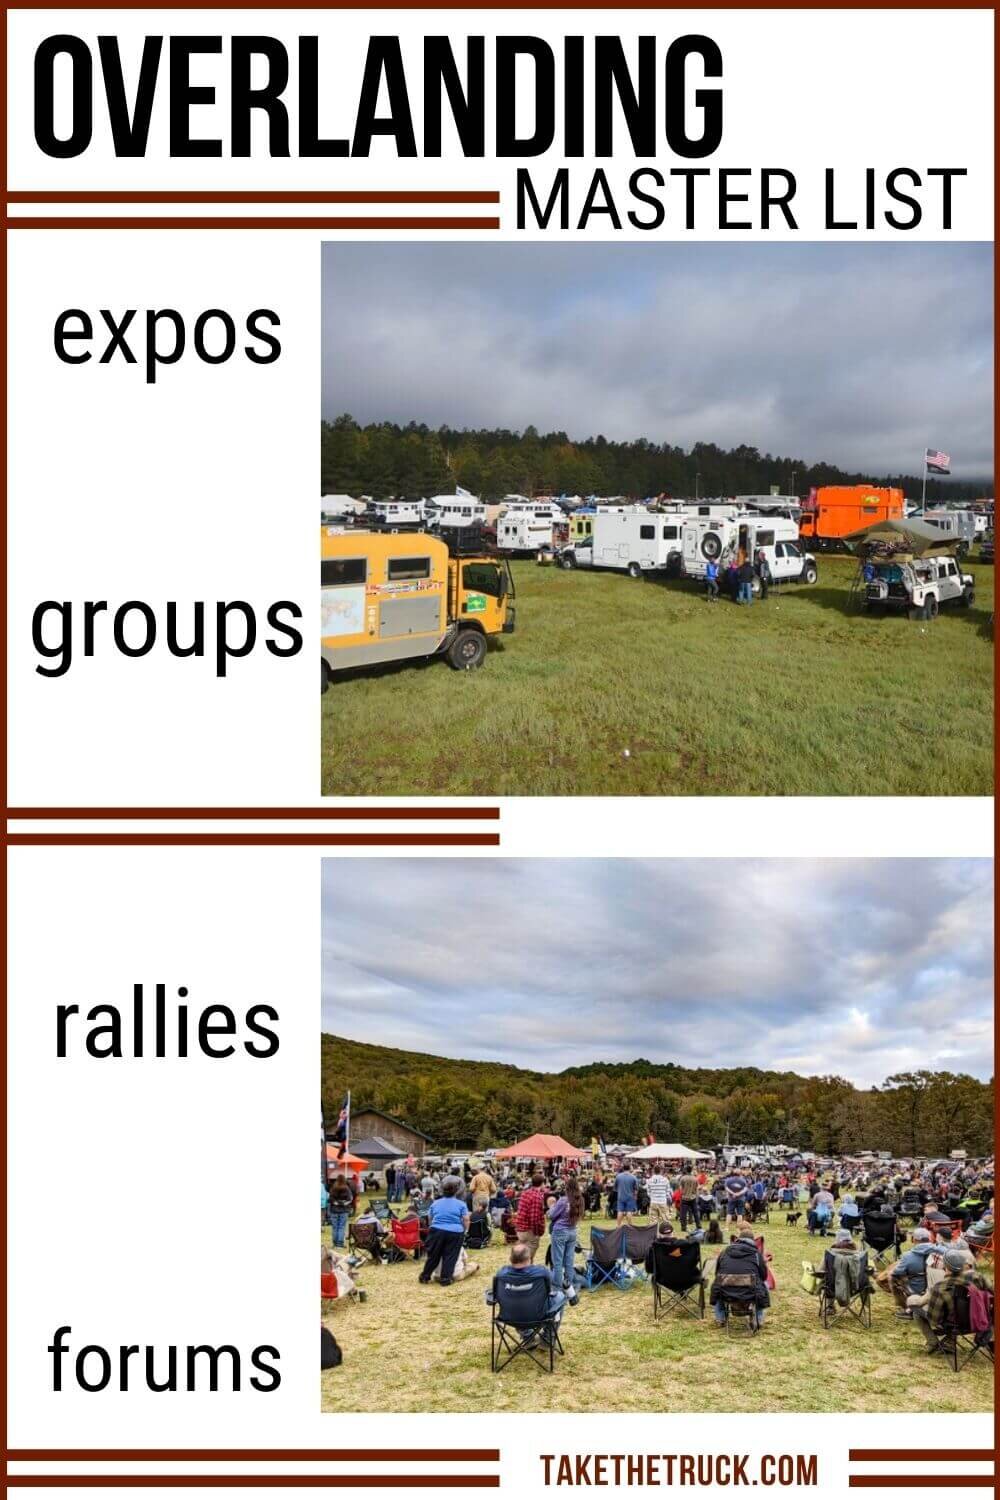 Are you an overlanding beginner wondering how to start overlanding? Use this master list to find an overland event, overland group, forum, overland expo, or overland rally all about overland travel!